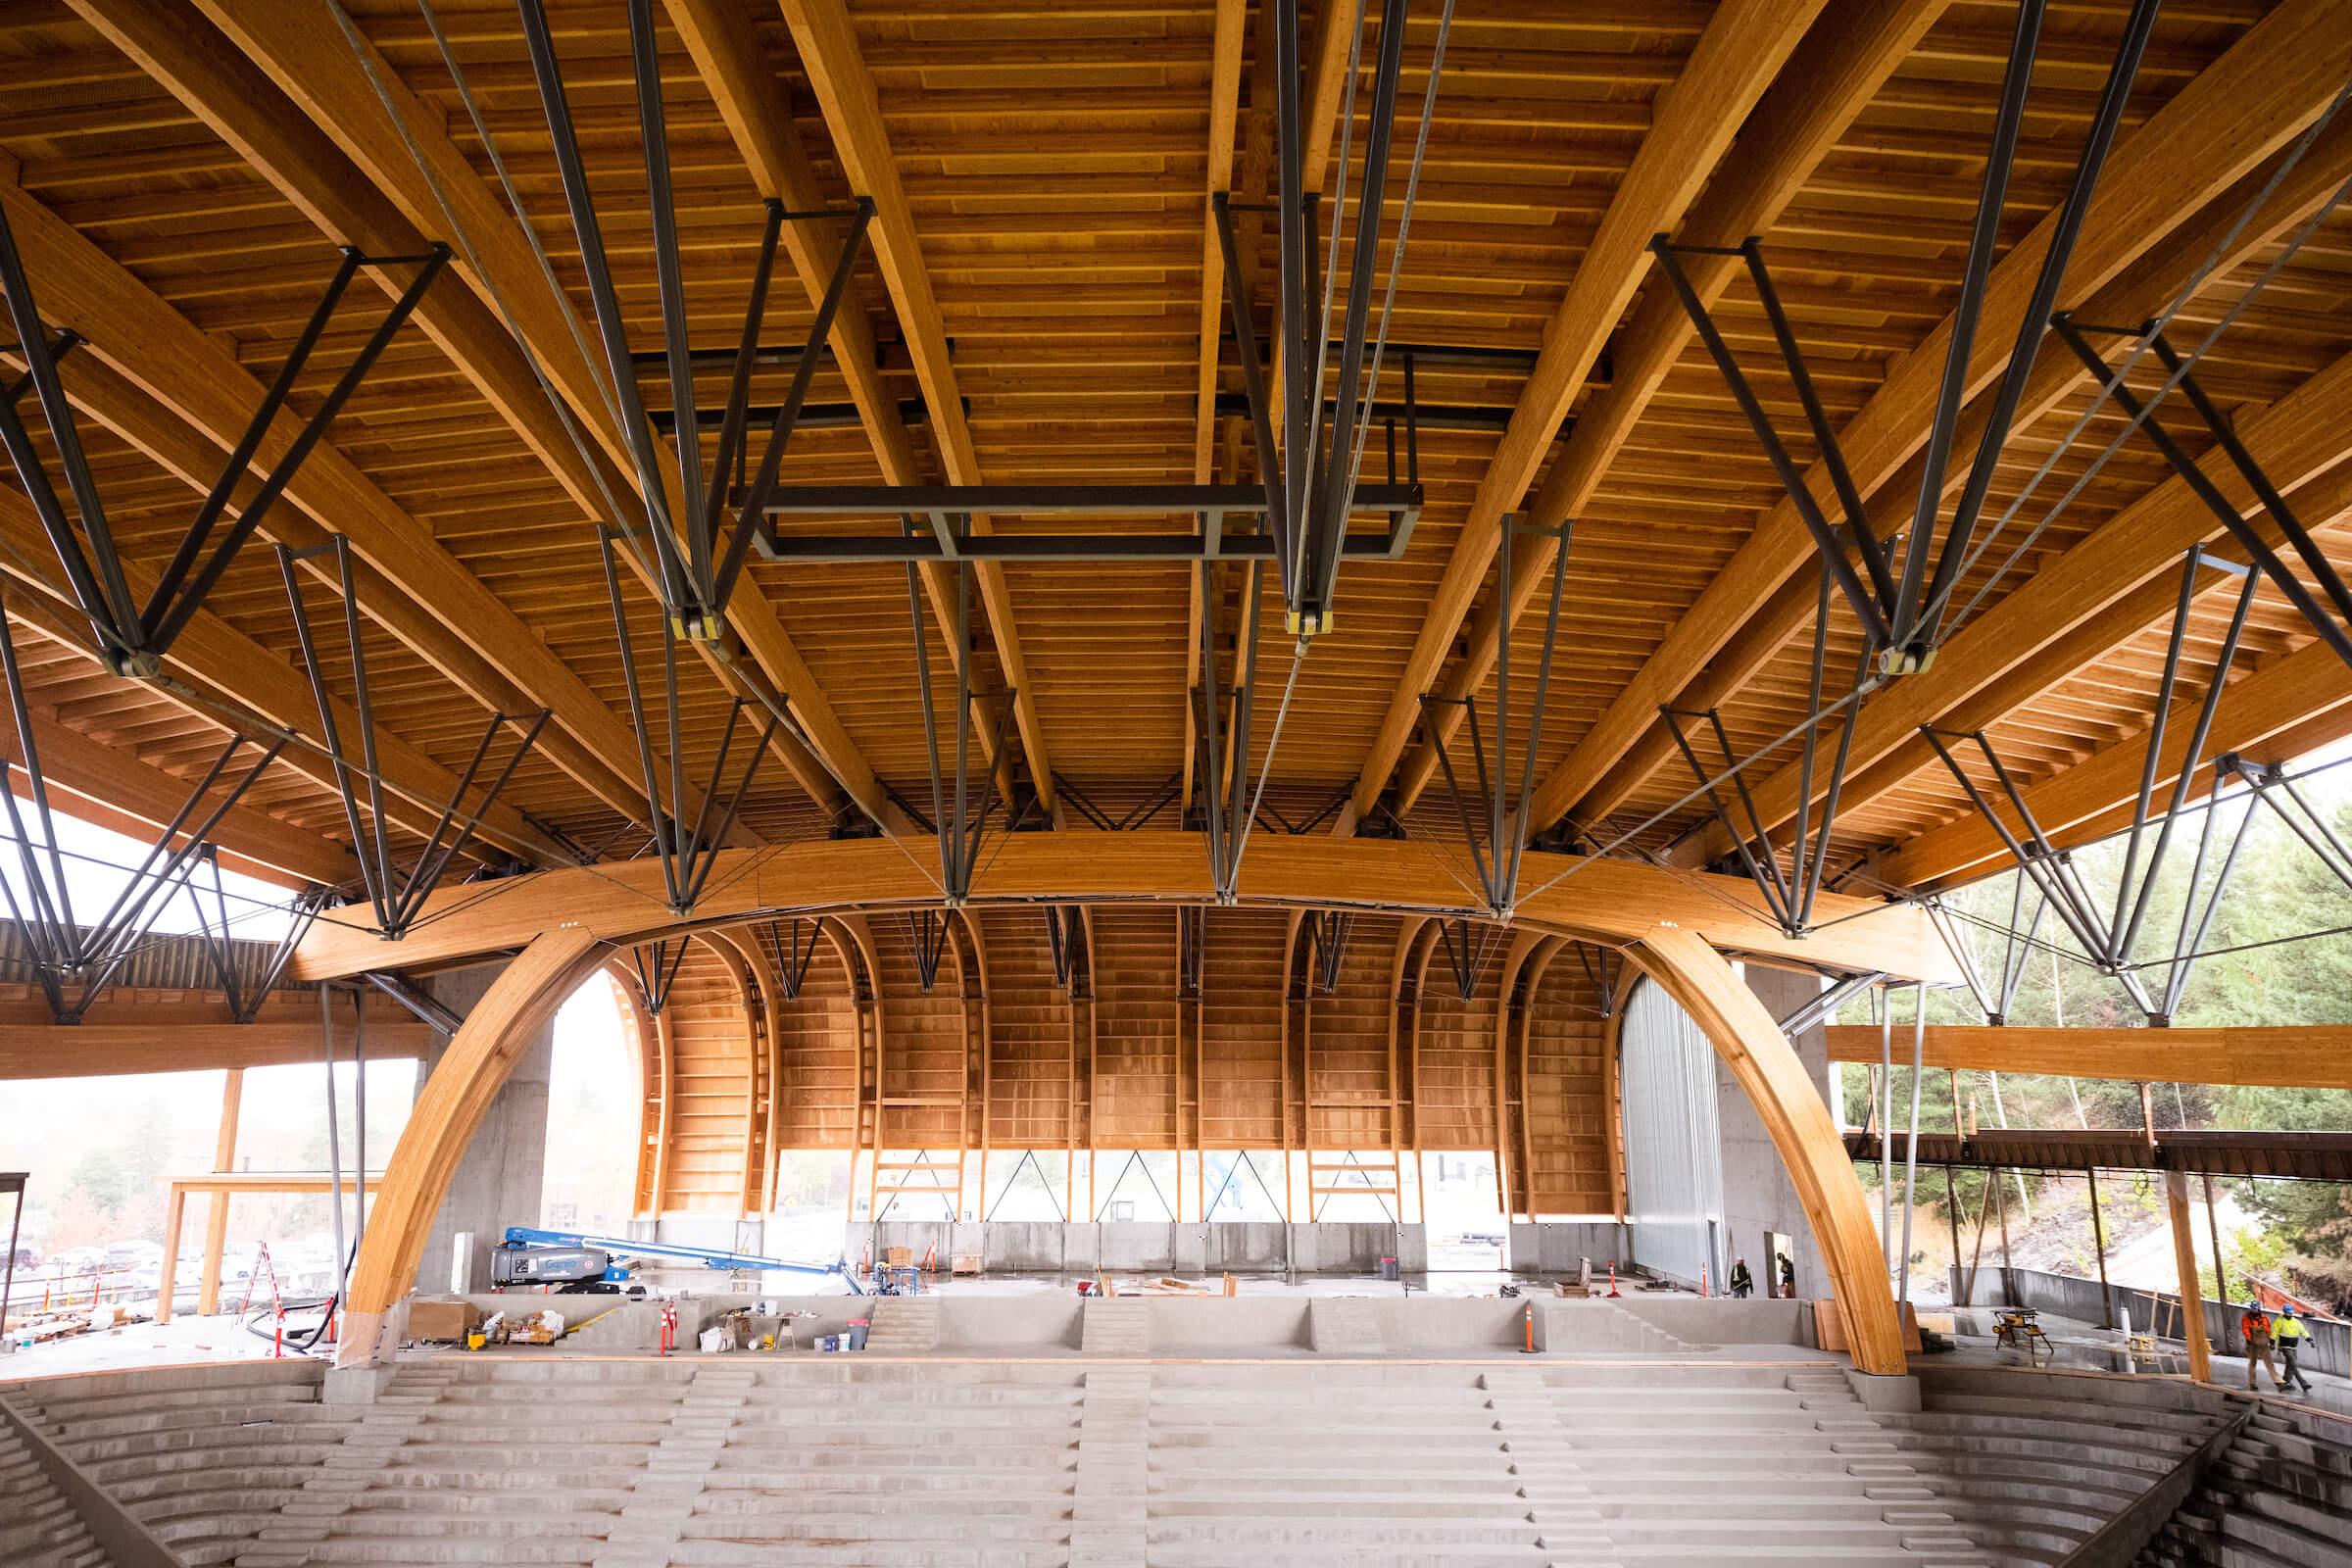 Installation of a large curved timber roof